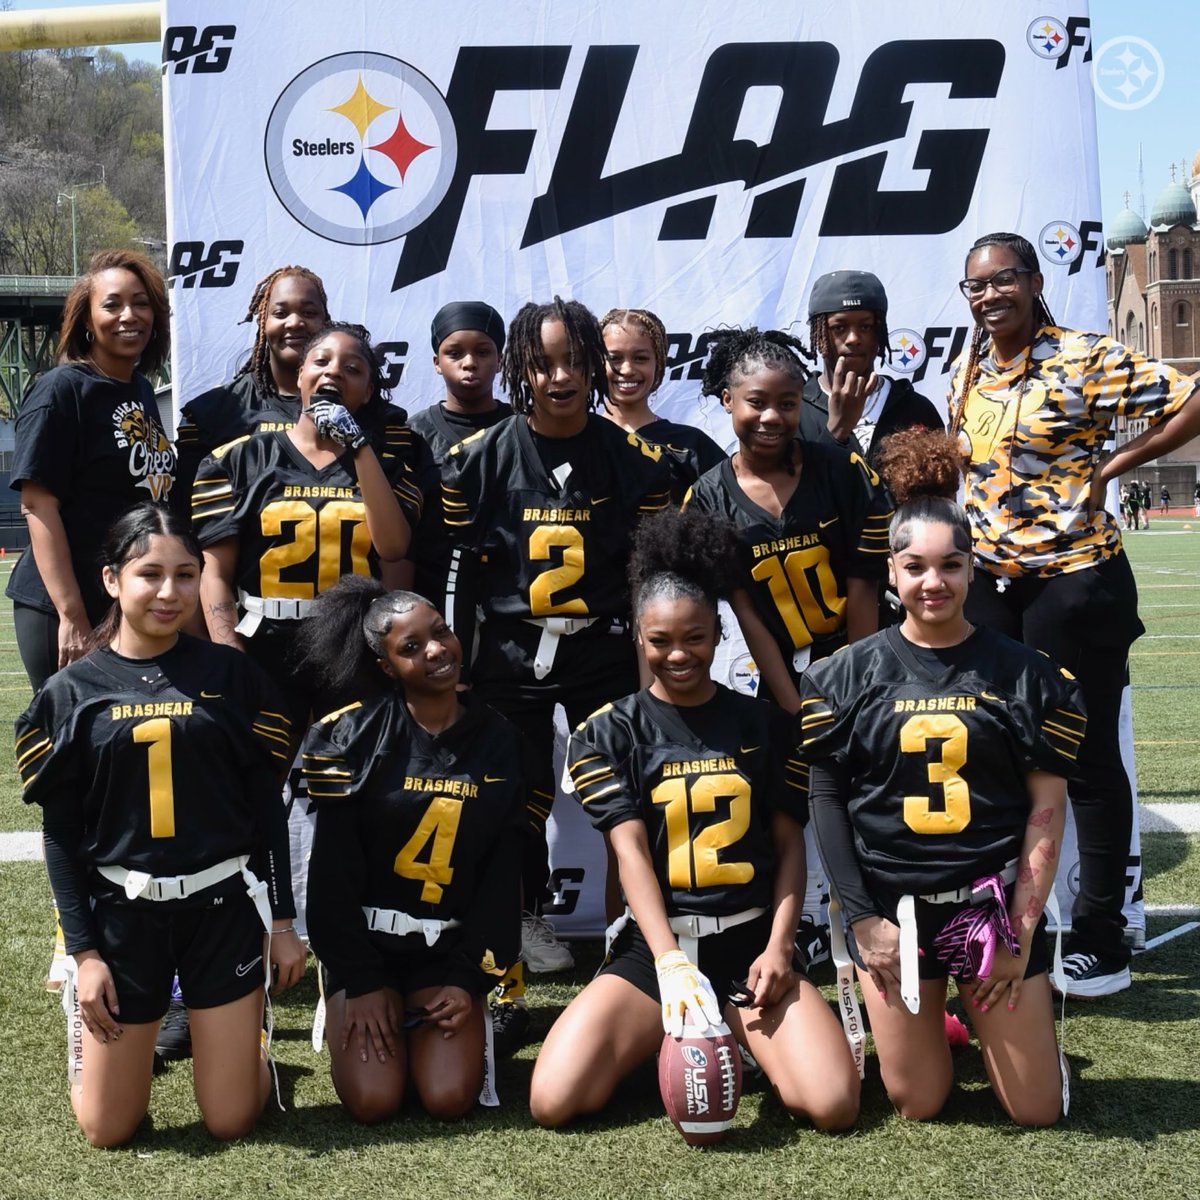 Another great weekend of Girls Flag Football in the books! @pghflagfootball | @NFLFLAG